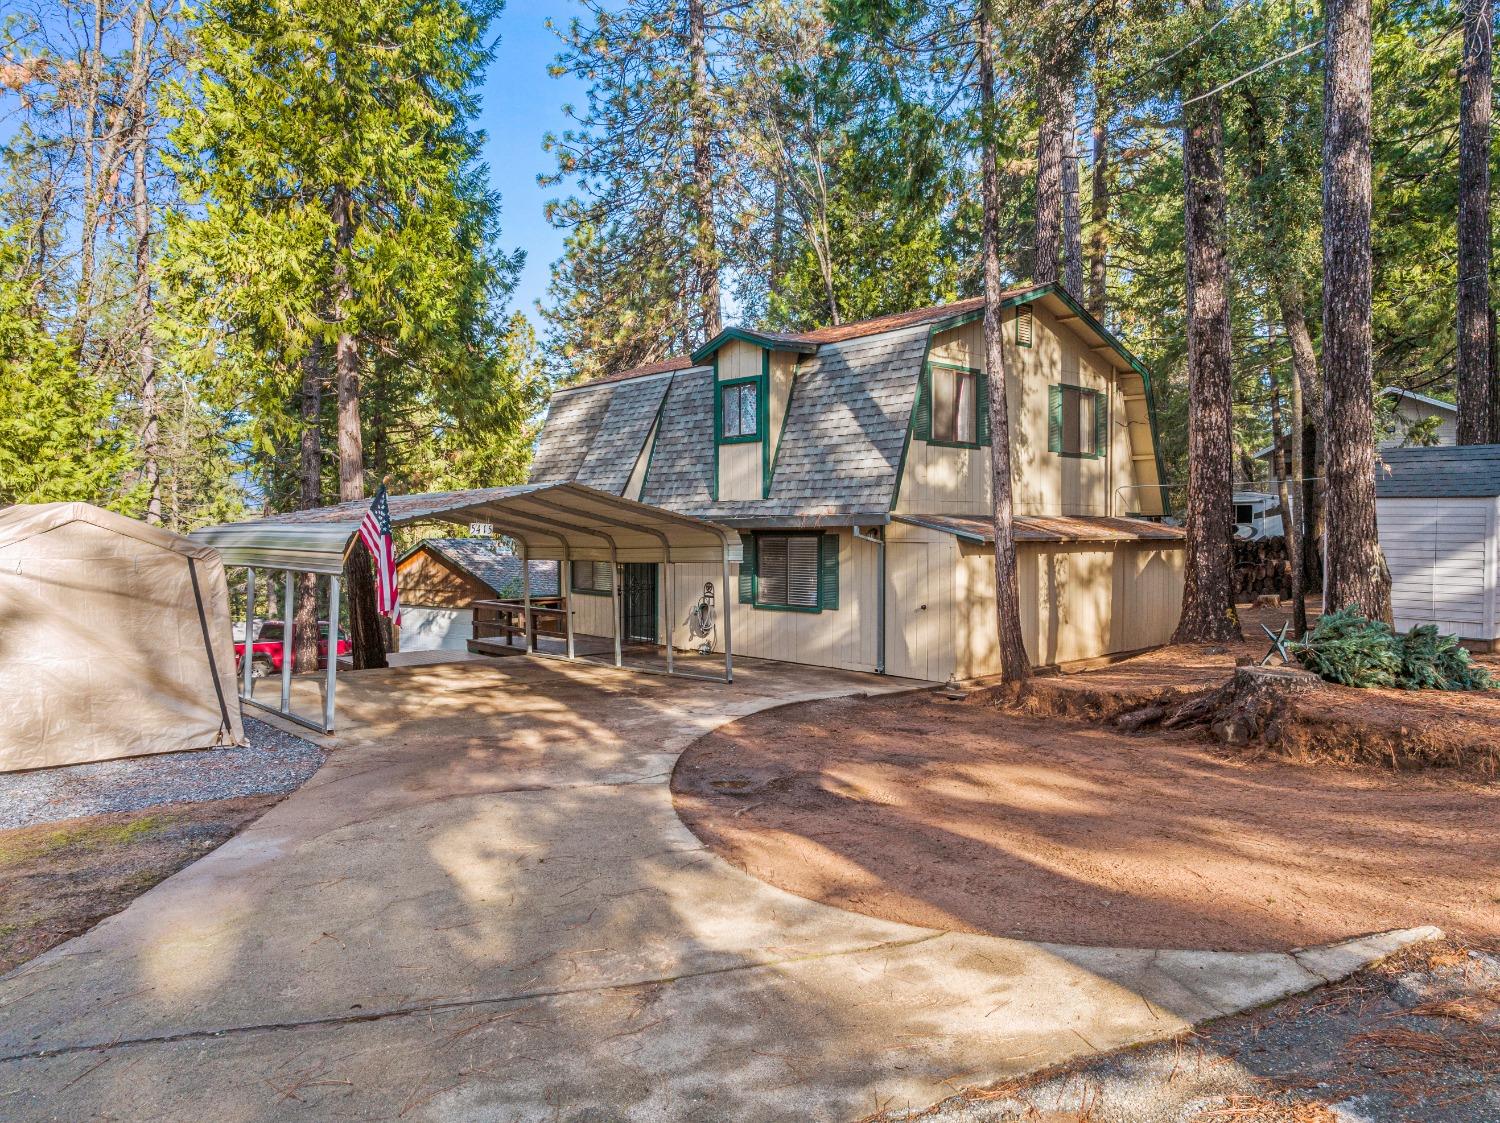 Photo of 5415 Buttercup Dr in Pollock Pines, CA